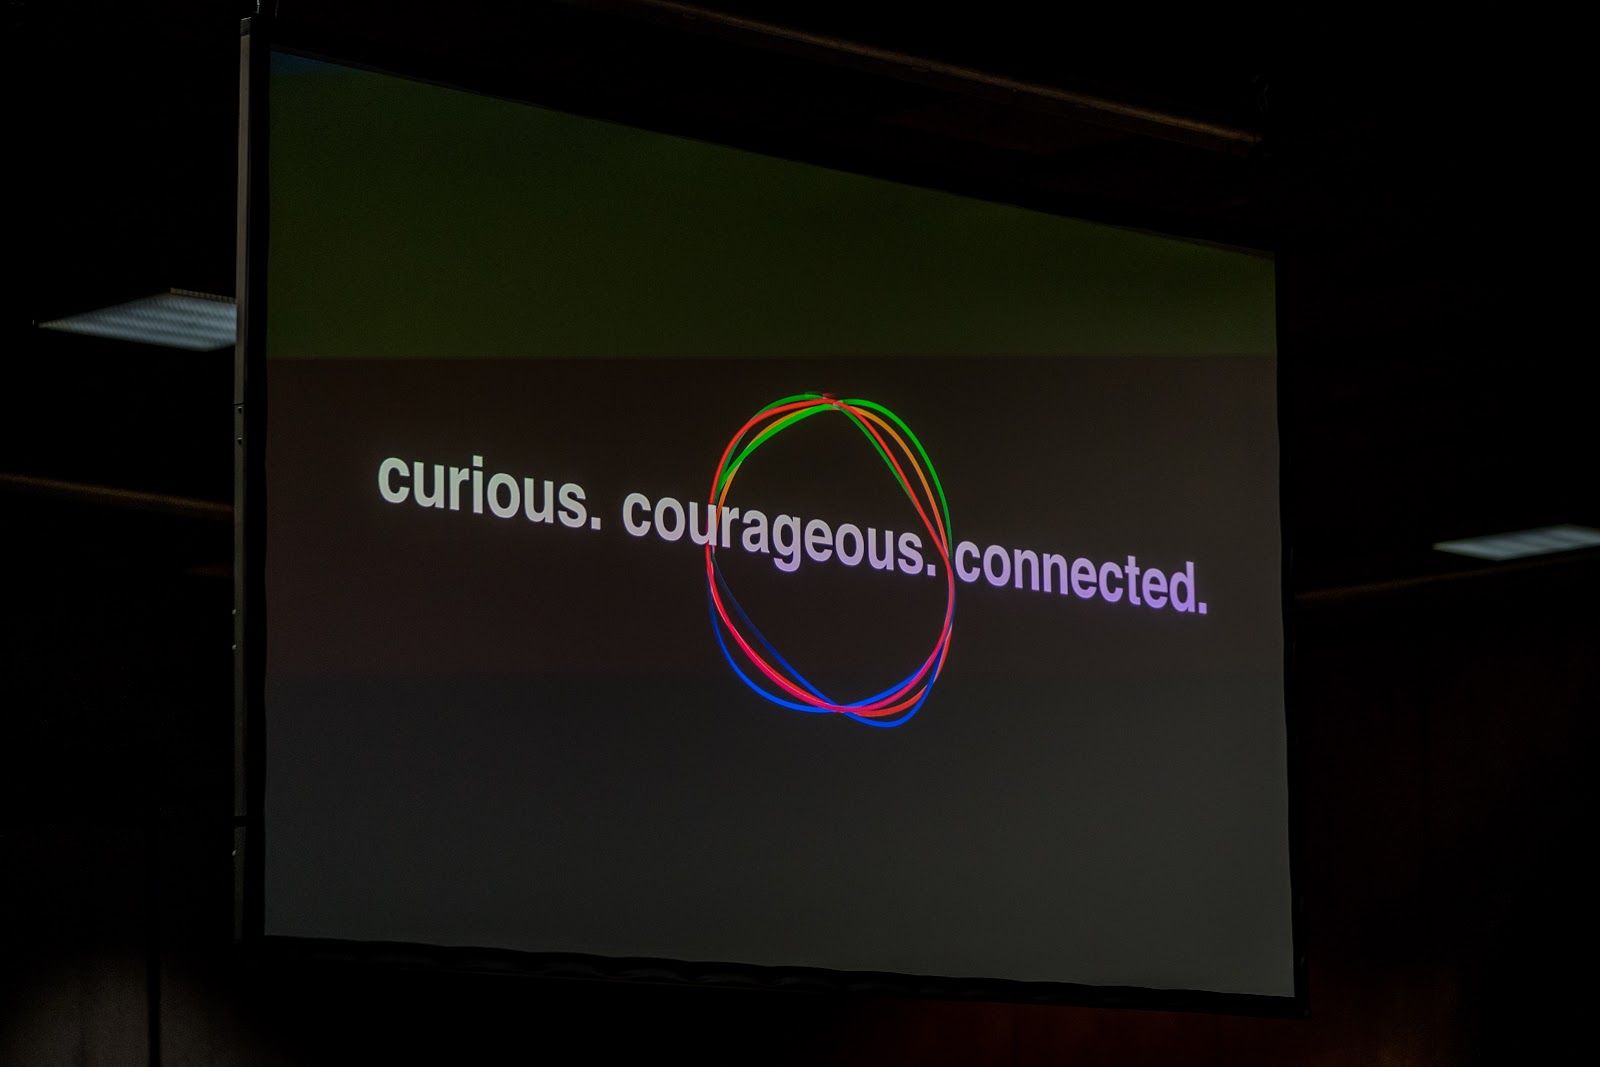 curious. courageous. connected.